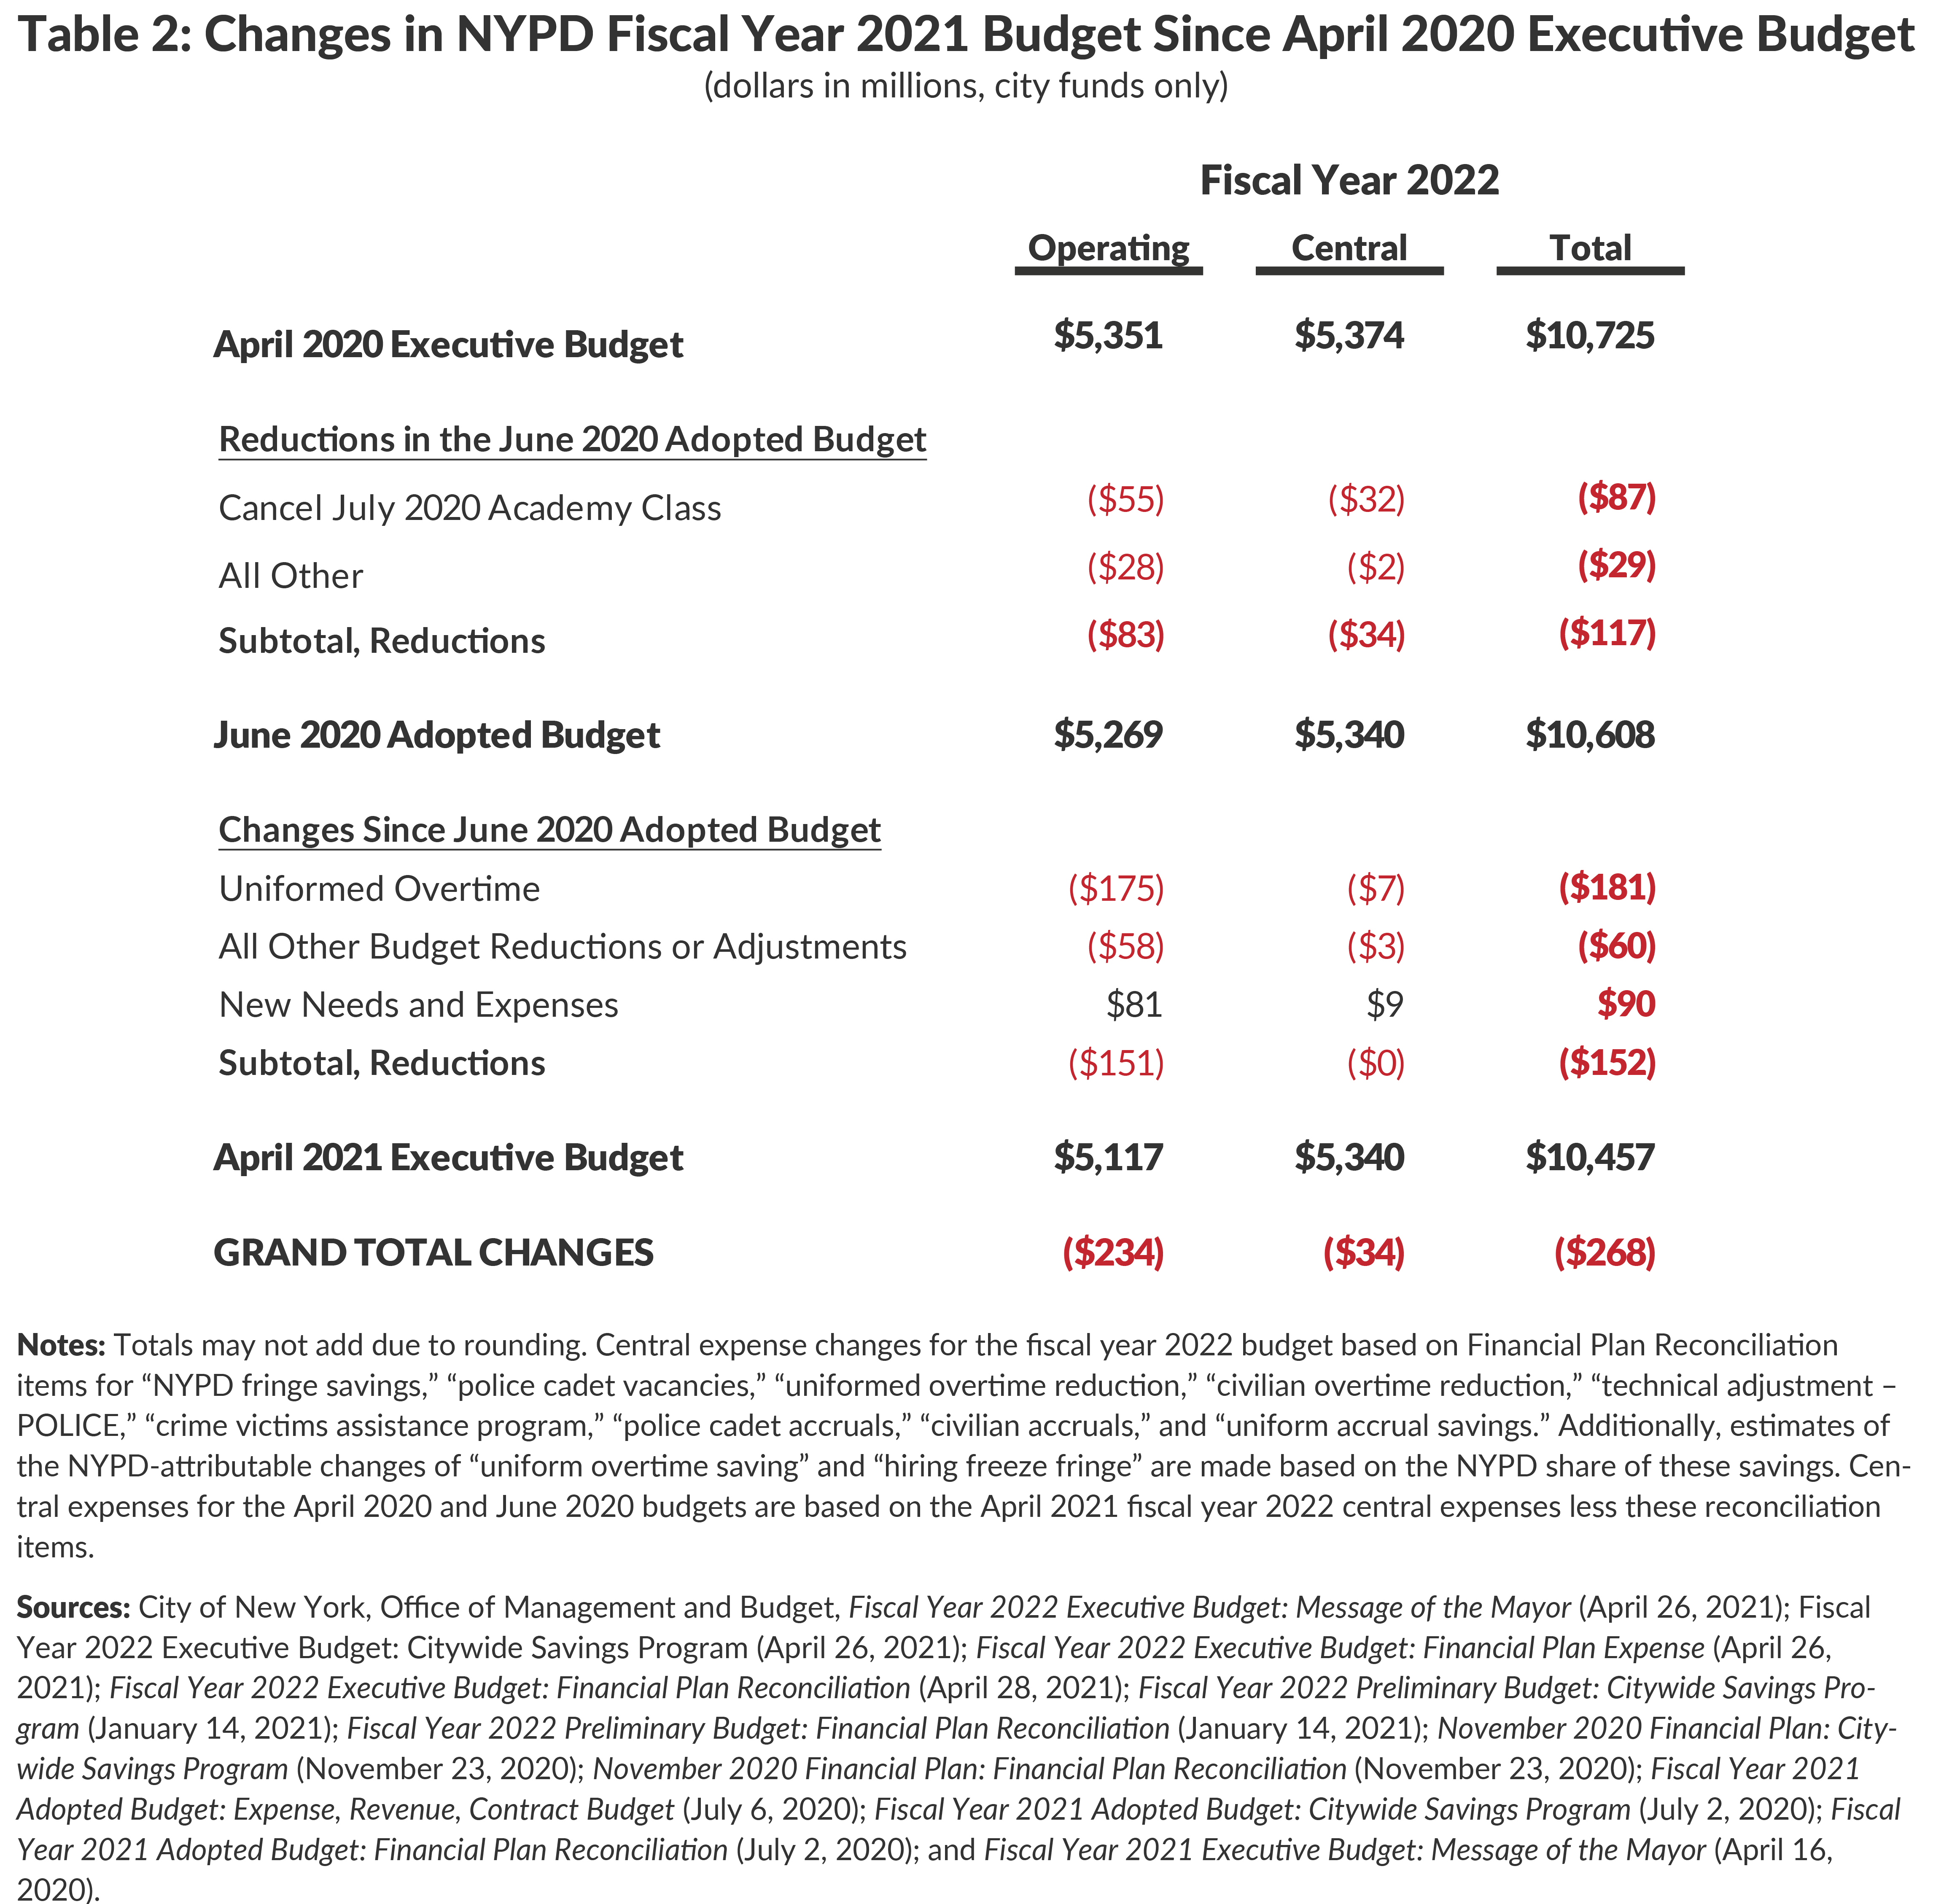 Table 2. Changes in NYPD Fiscal Year 2022 Budget Since April 2020 Executive Budget